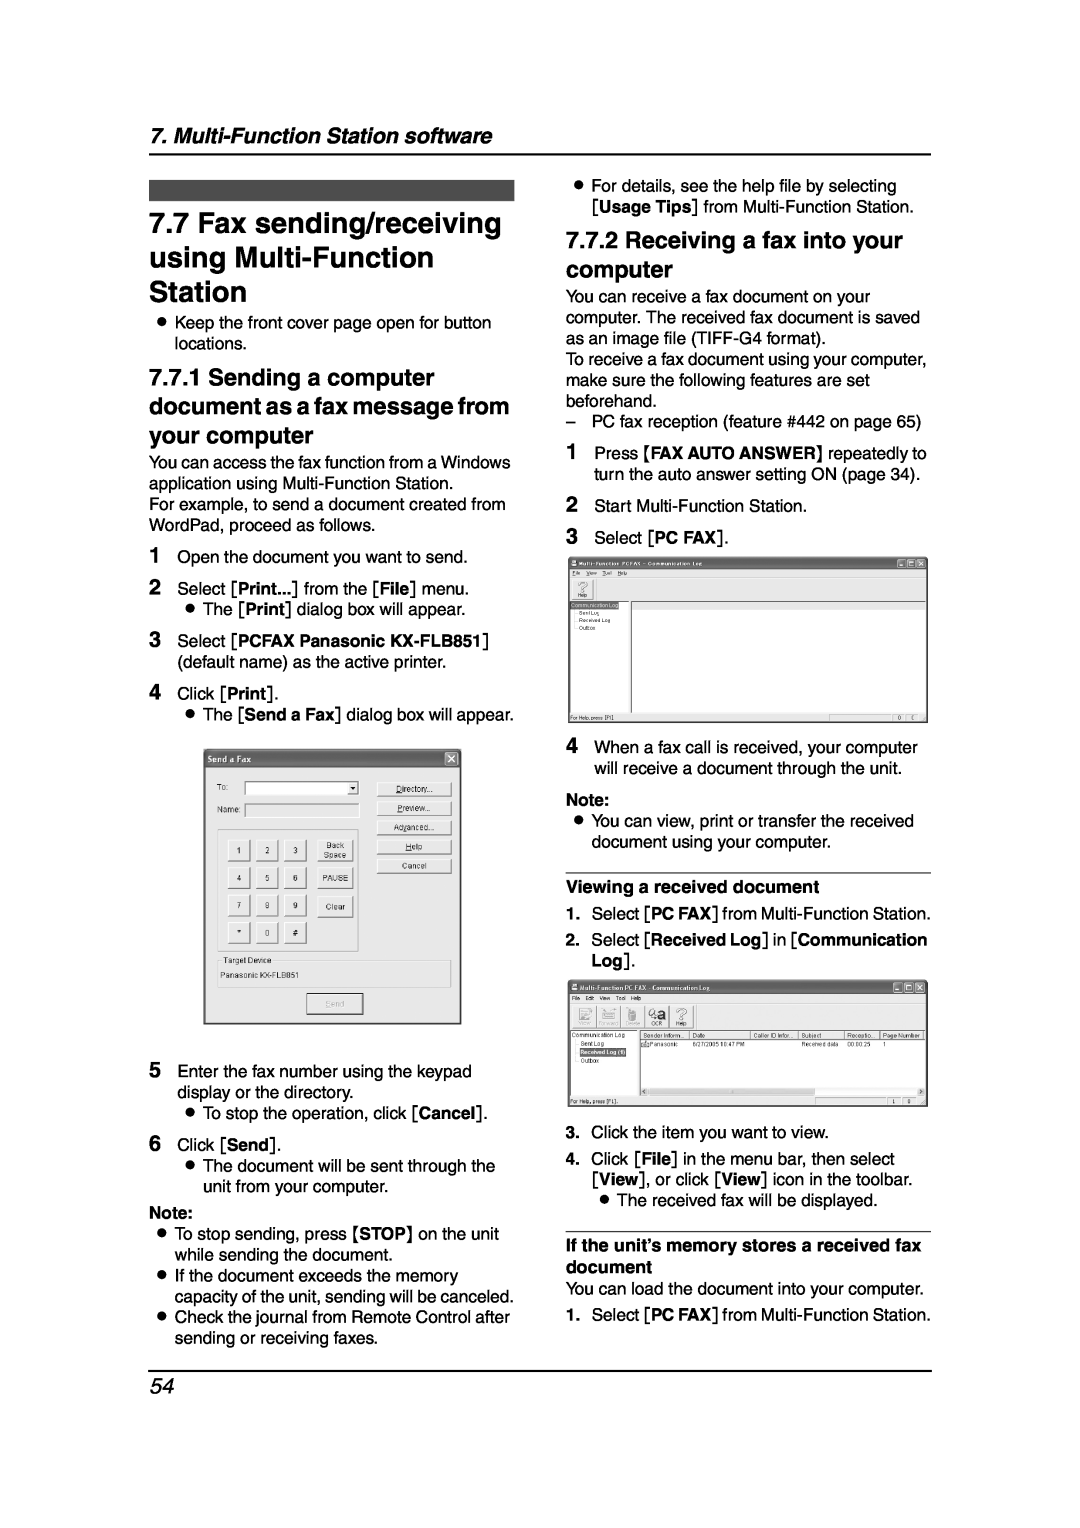 Panasonic KX-FLB851 manual Fax sending/receiving using Multi-Function Station, Receiving a fax into your computer 